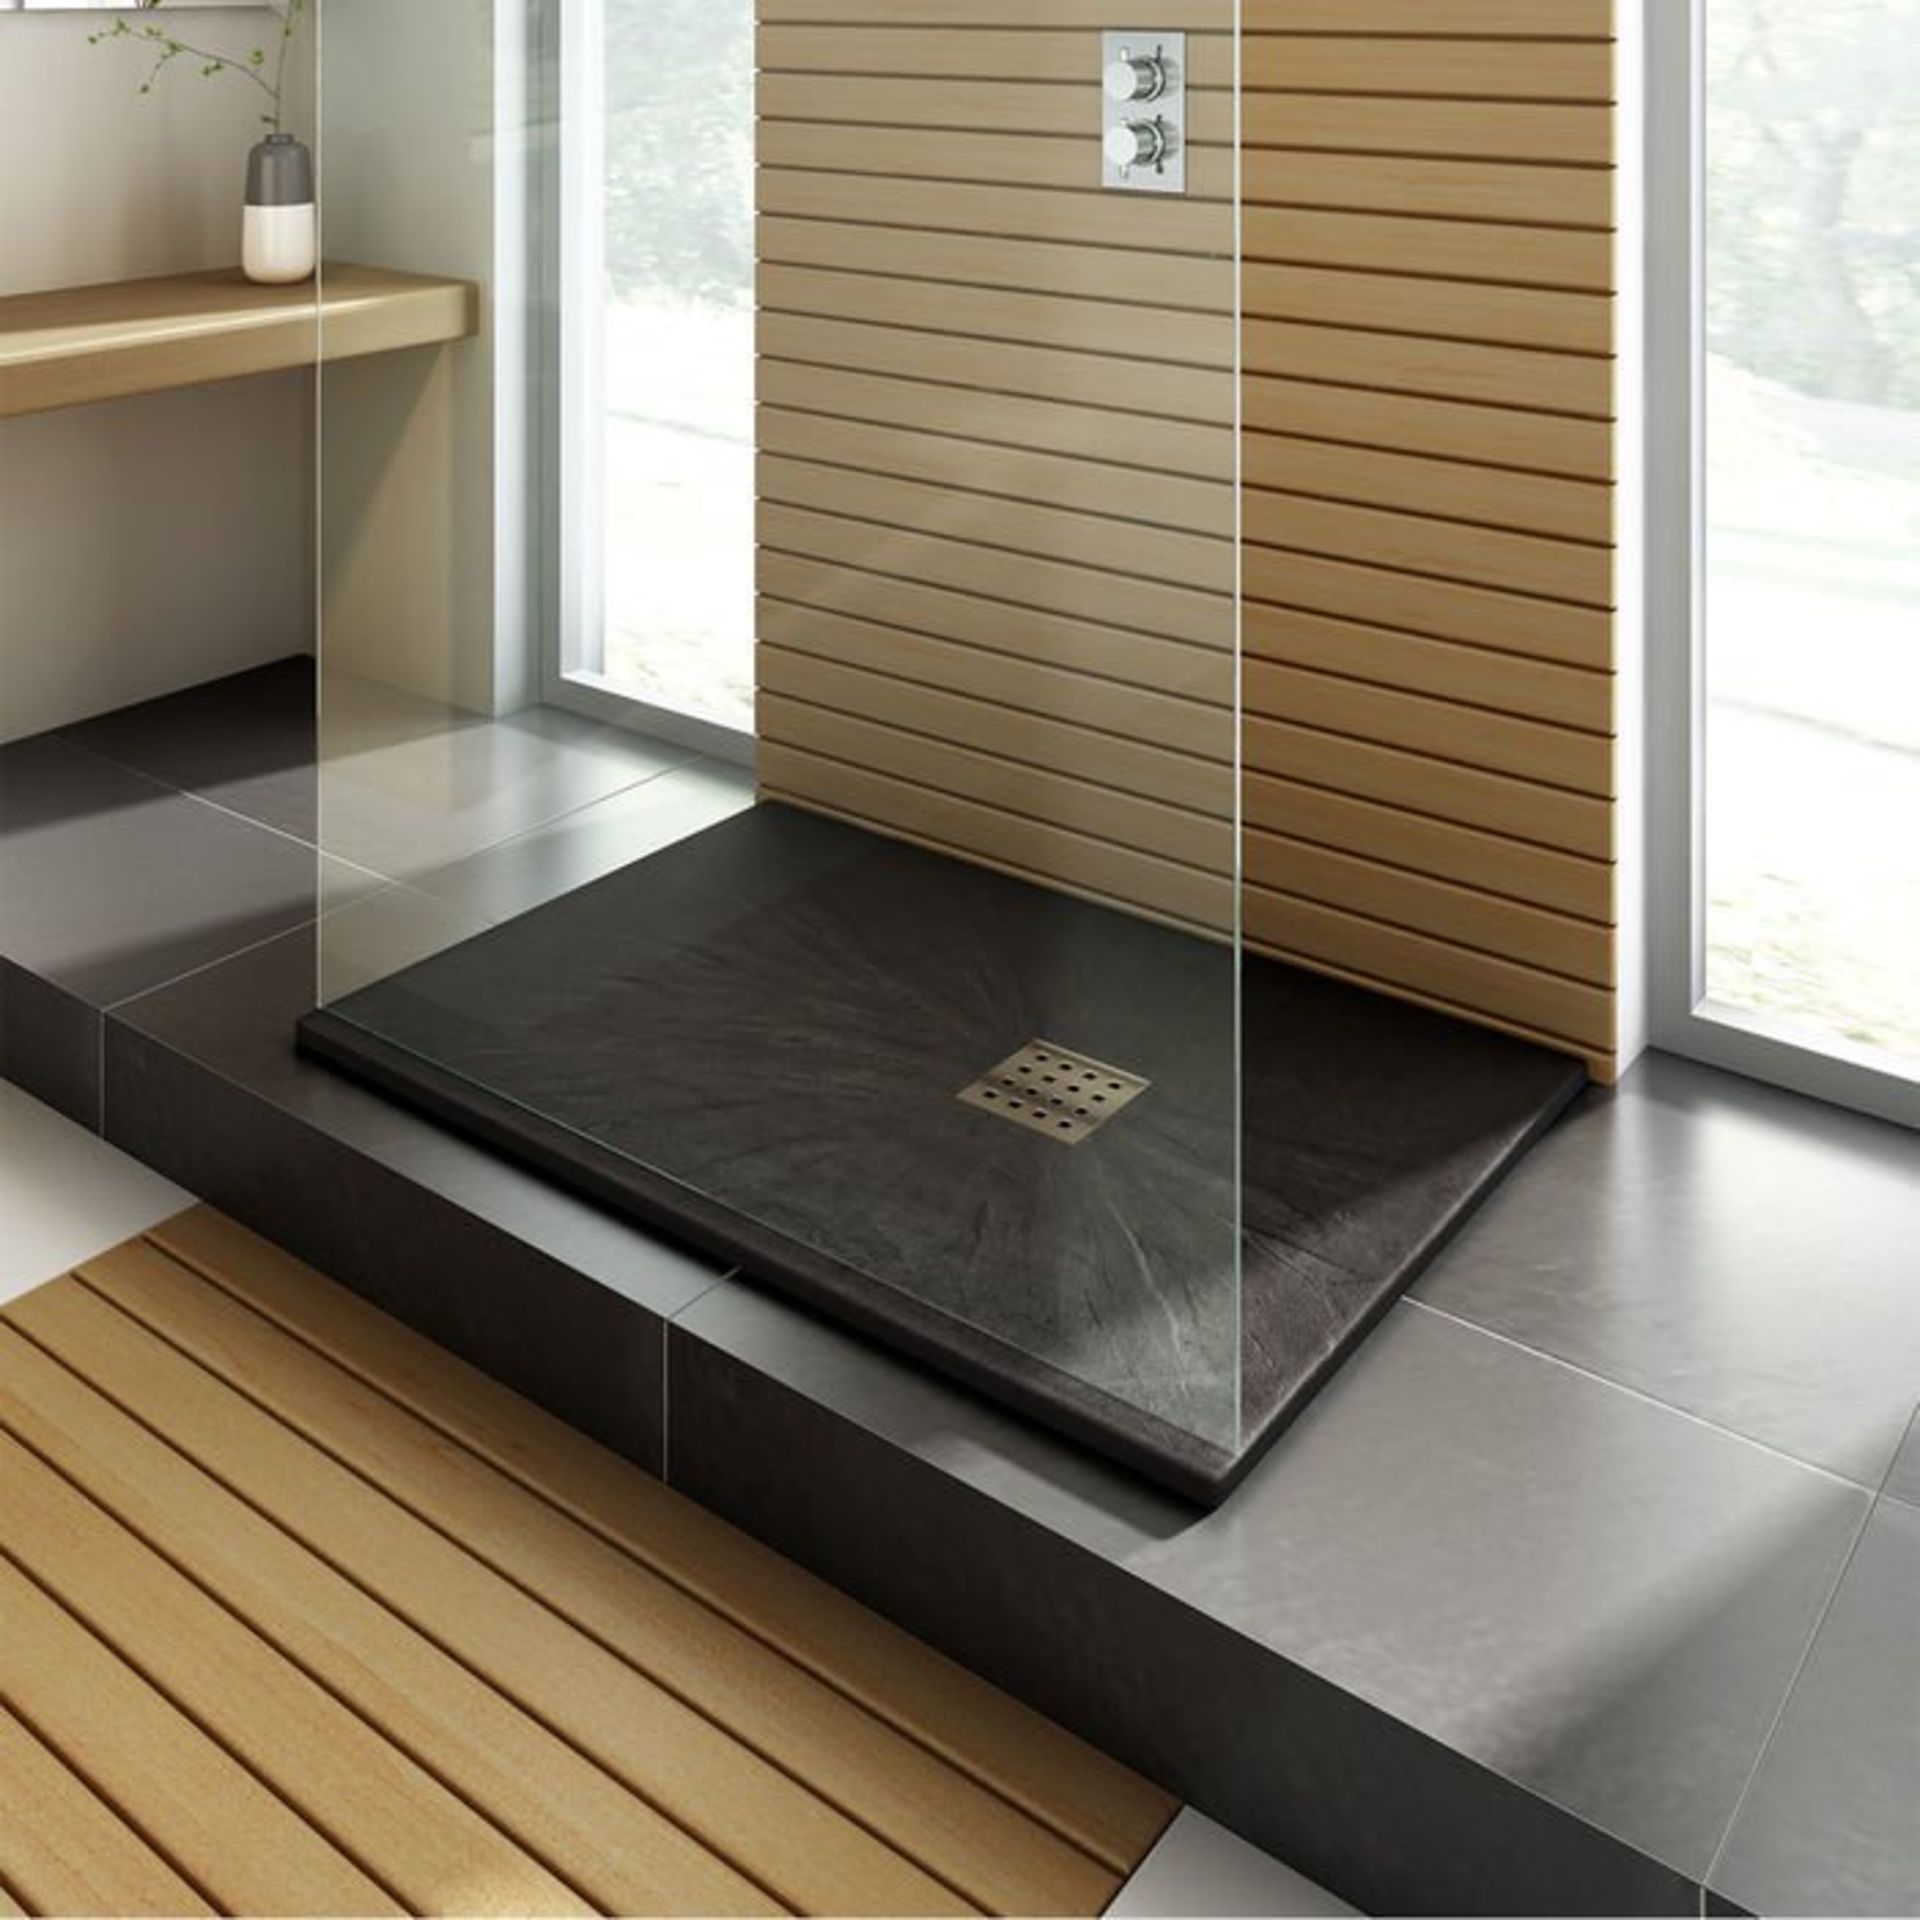 (G18) 1200x800mm Rectangular Slate Effect Shower Tray & Chrome Waste RRP £499.99. Hand crafted